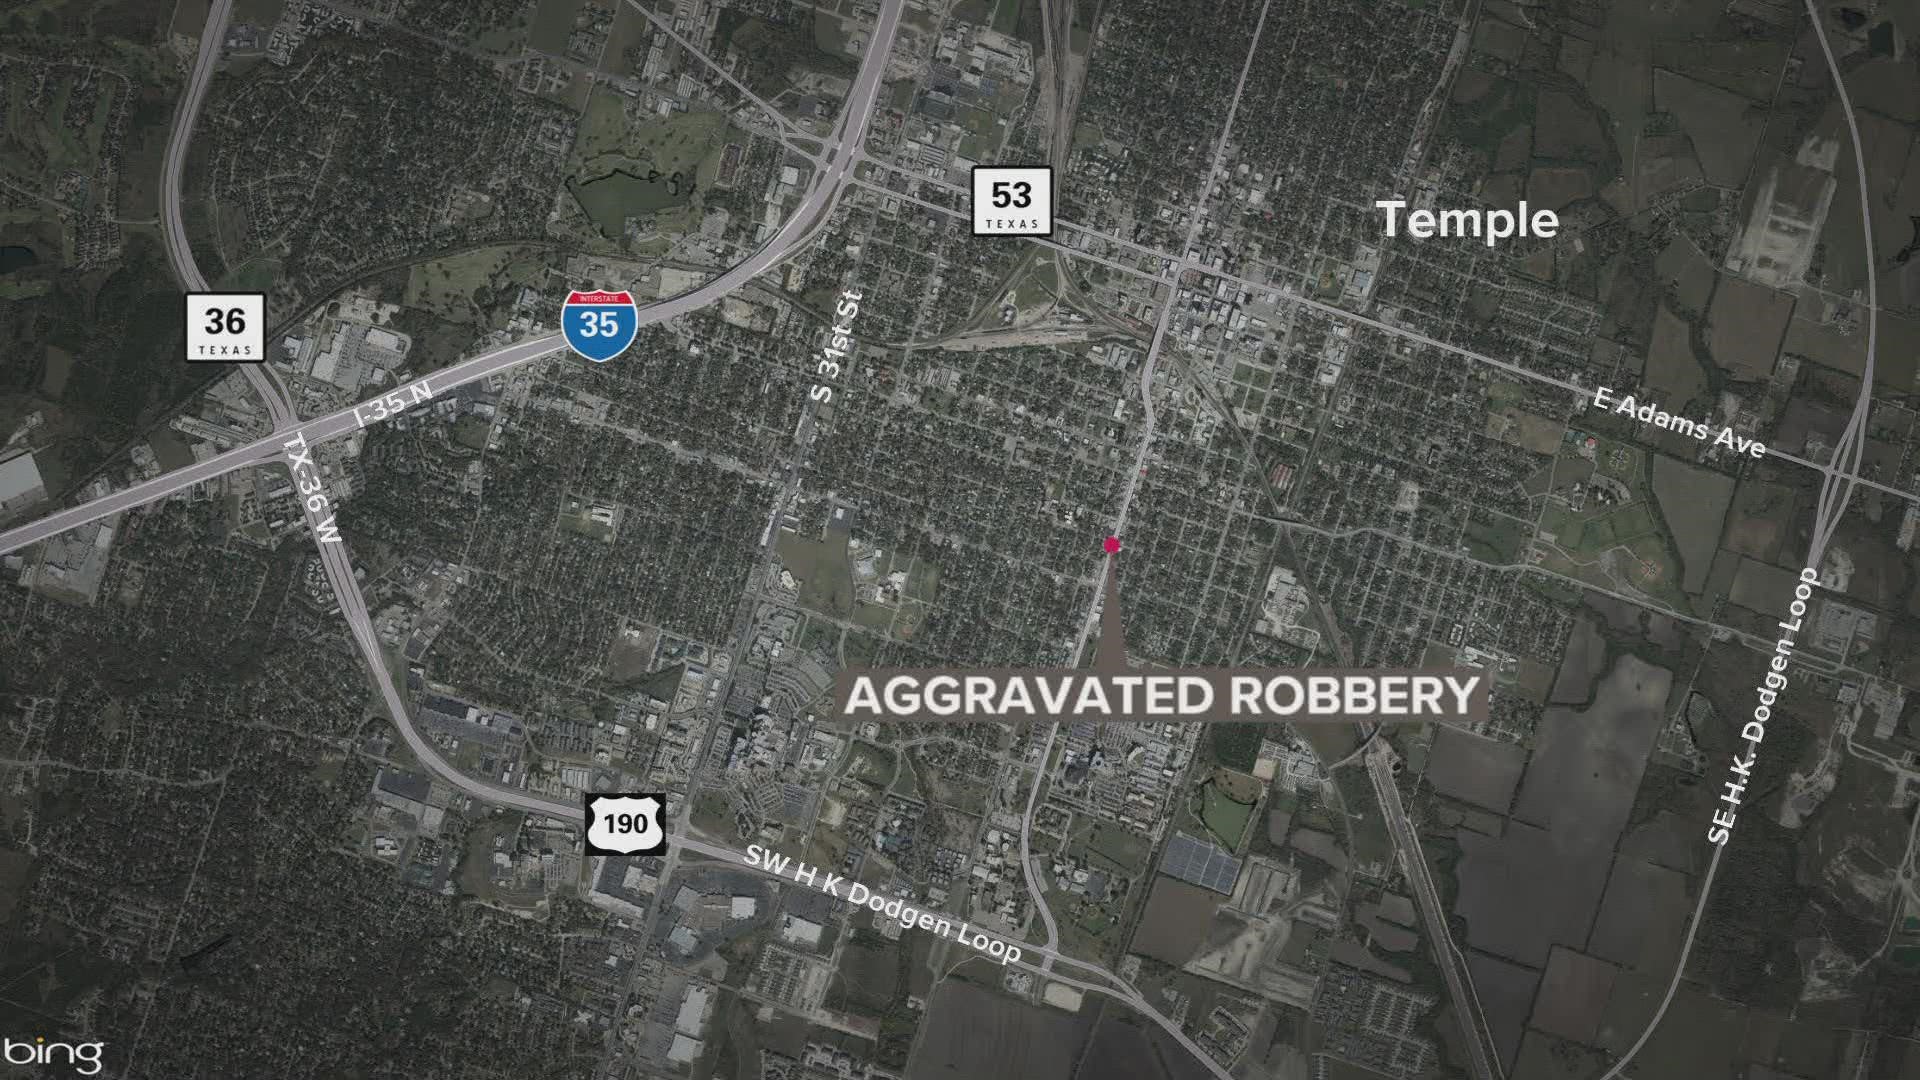 A man with a knife is said to have stolen a women's wallet, according to the Temple Police Department.